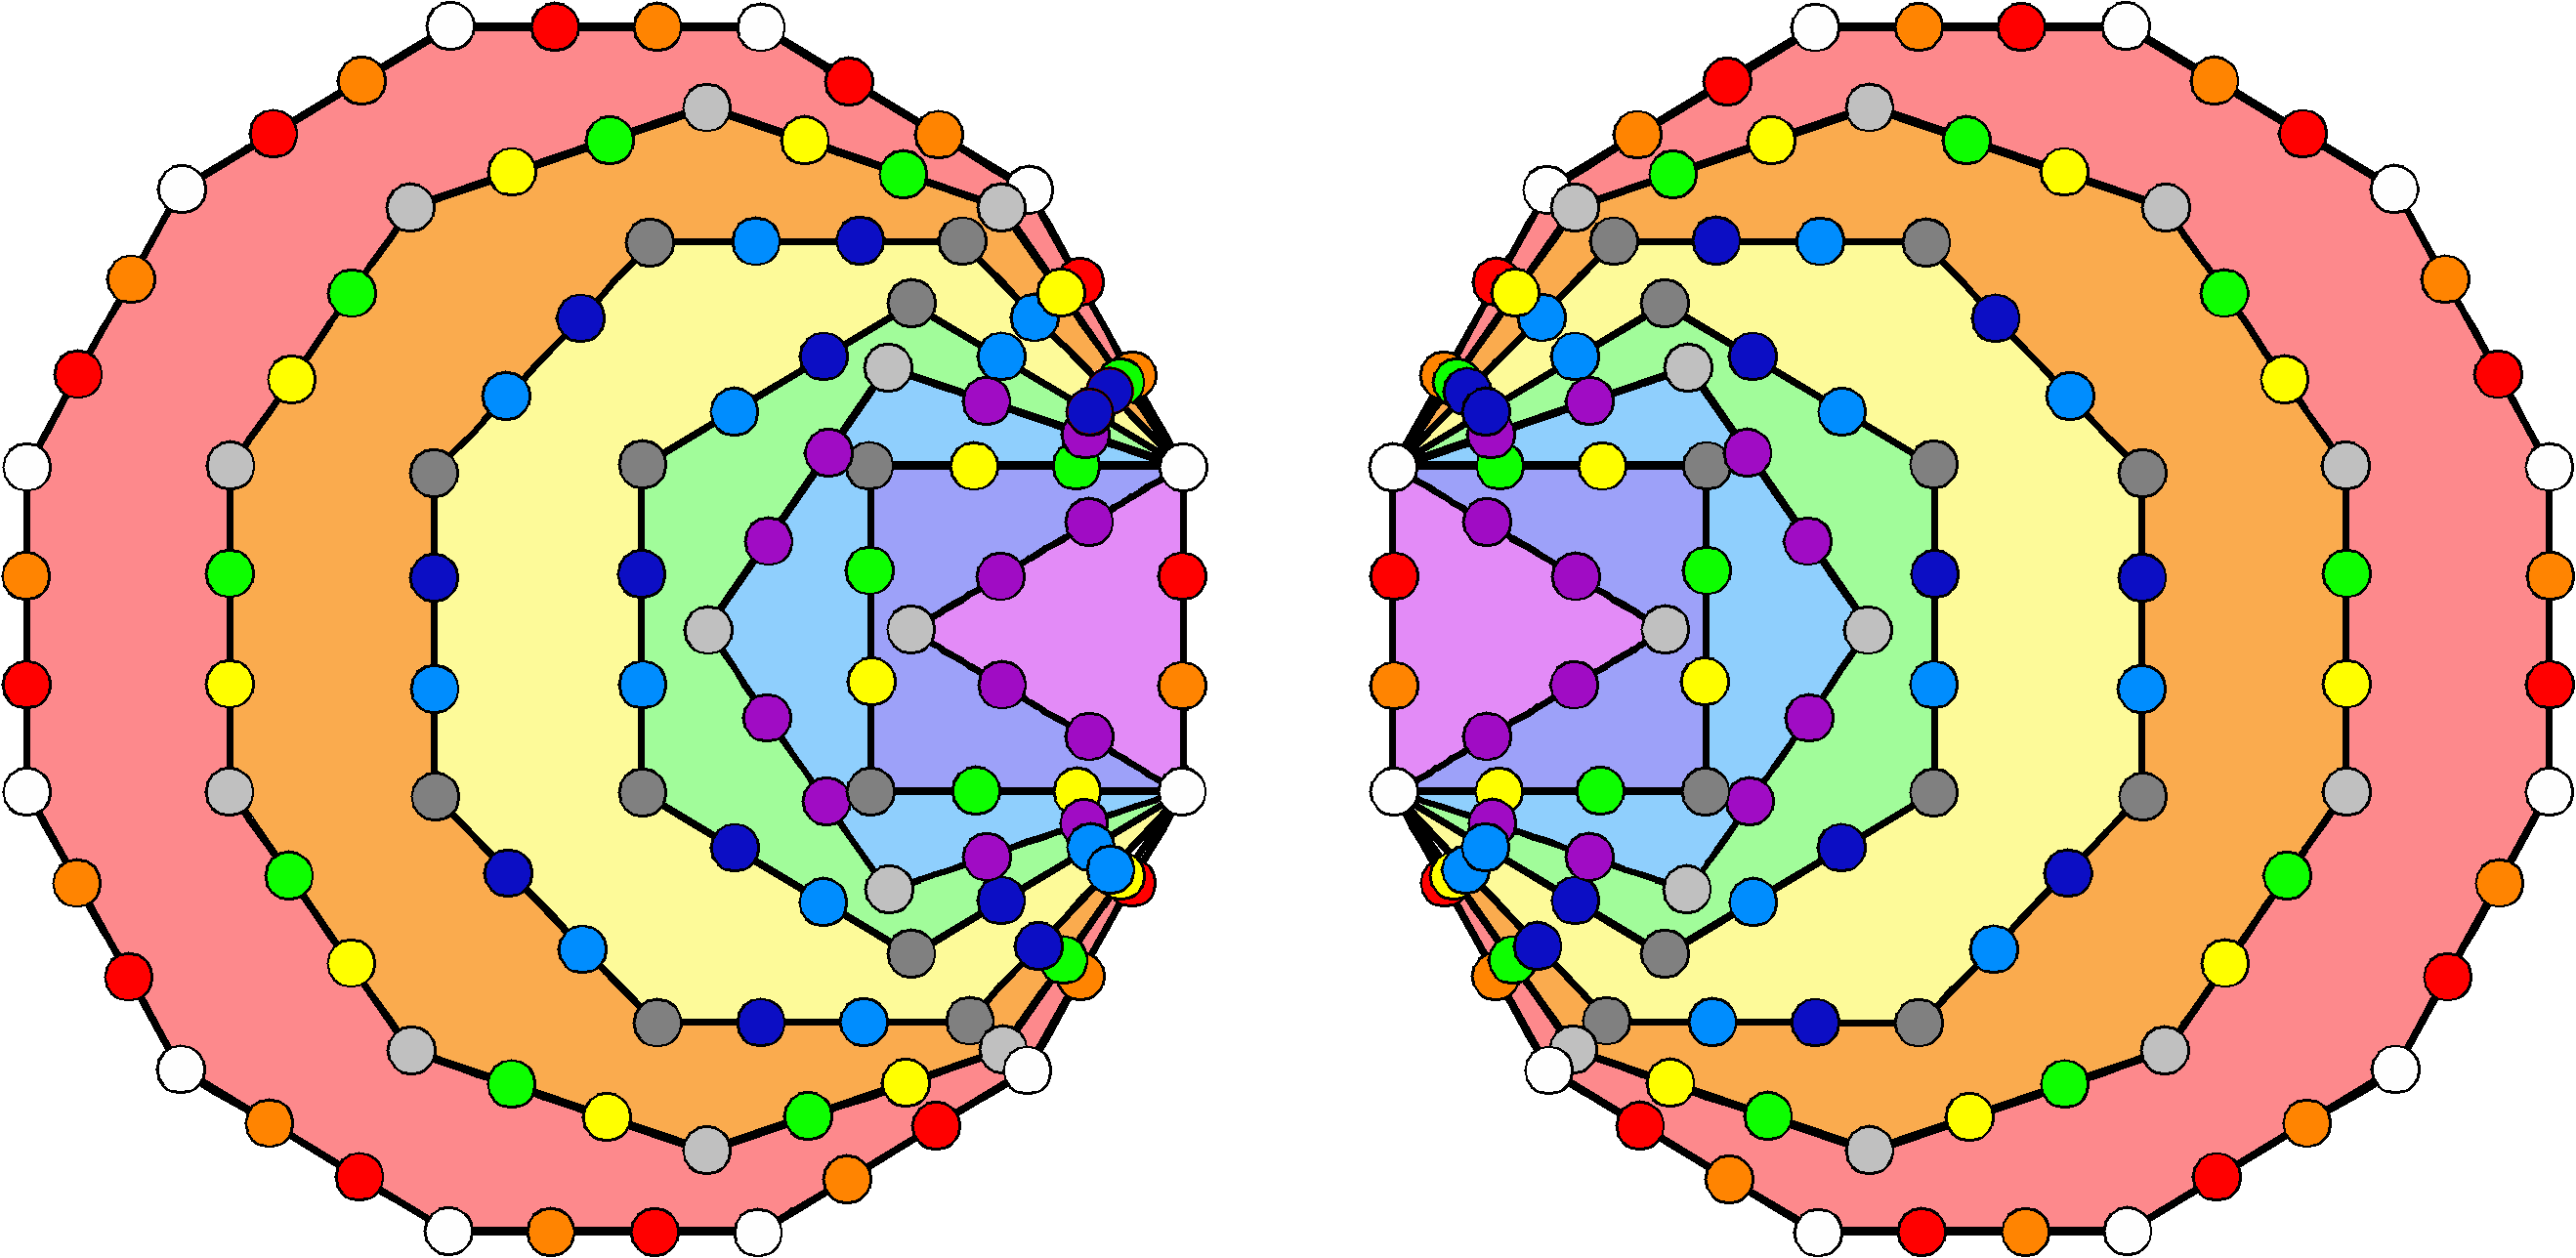 10 sets of (12+12) boundary yods in (7+7) separate polygons